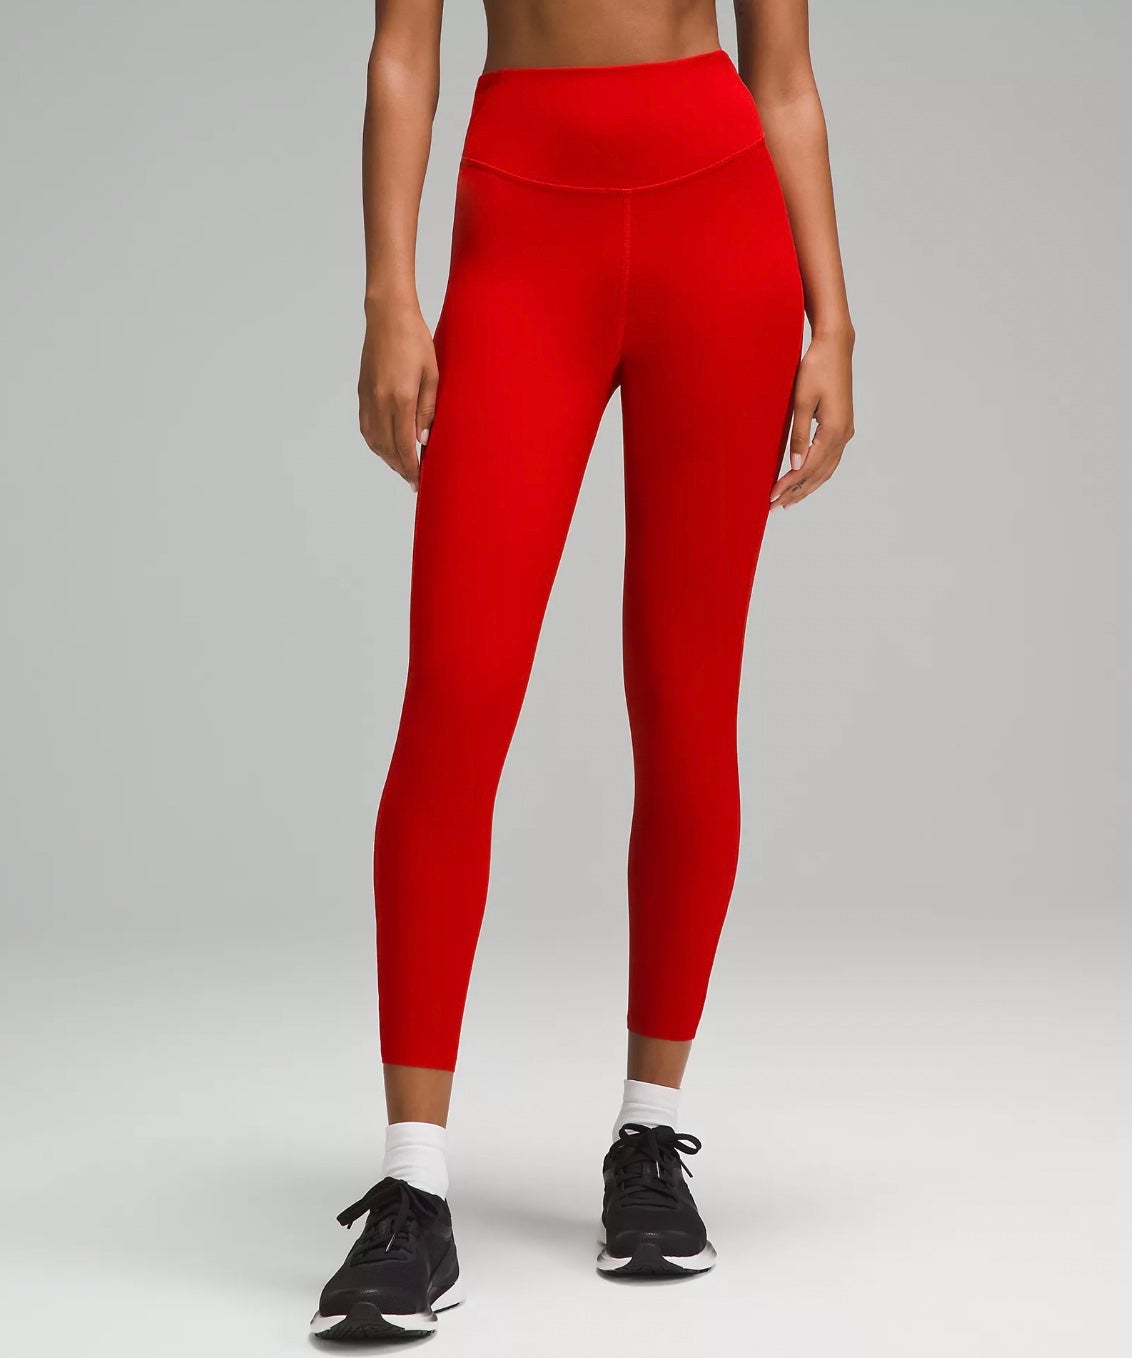 Shop lululemon's Post-Holiday Markdown Event 2023: Save on End-of